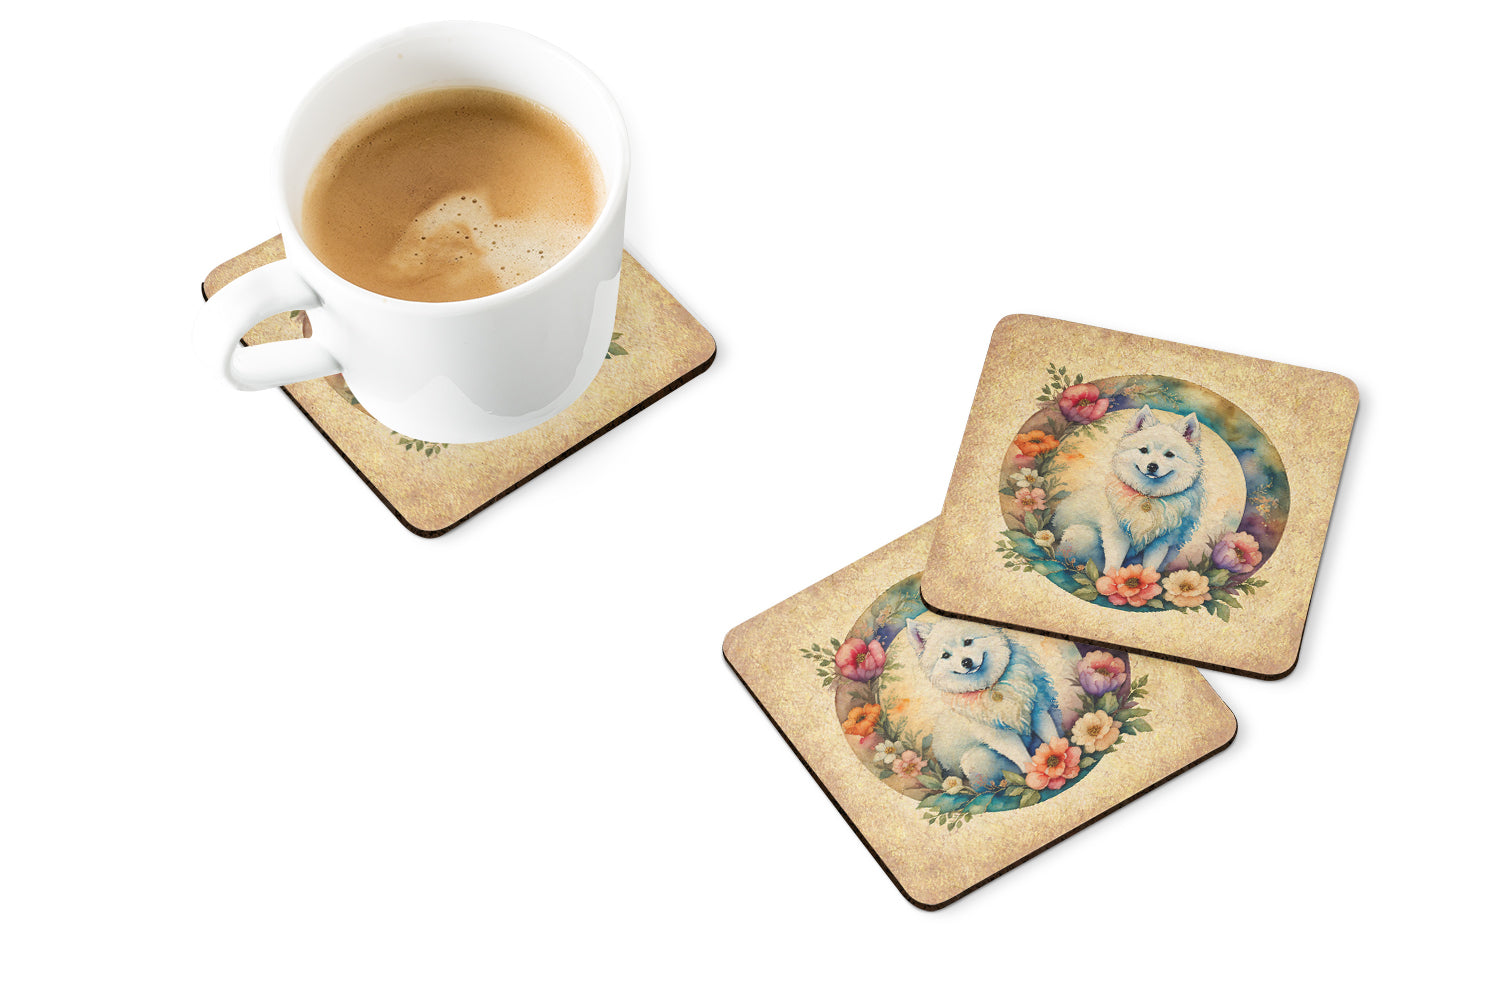 Buy this American Eskimo and Flowers Foam Coasters